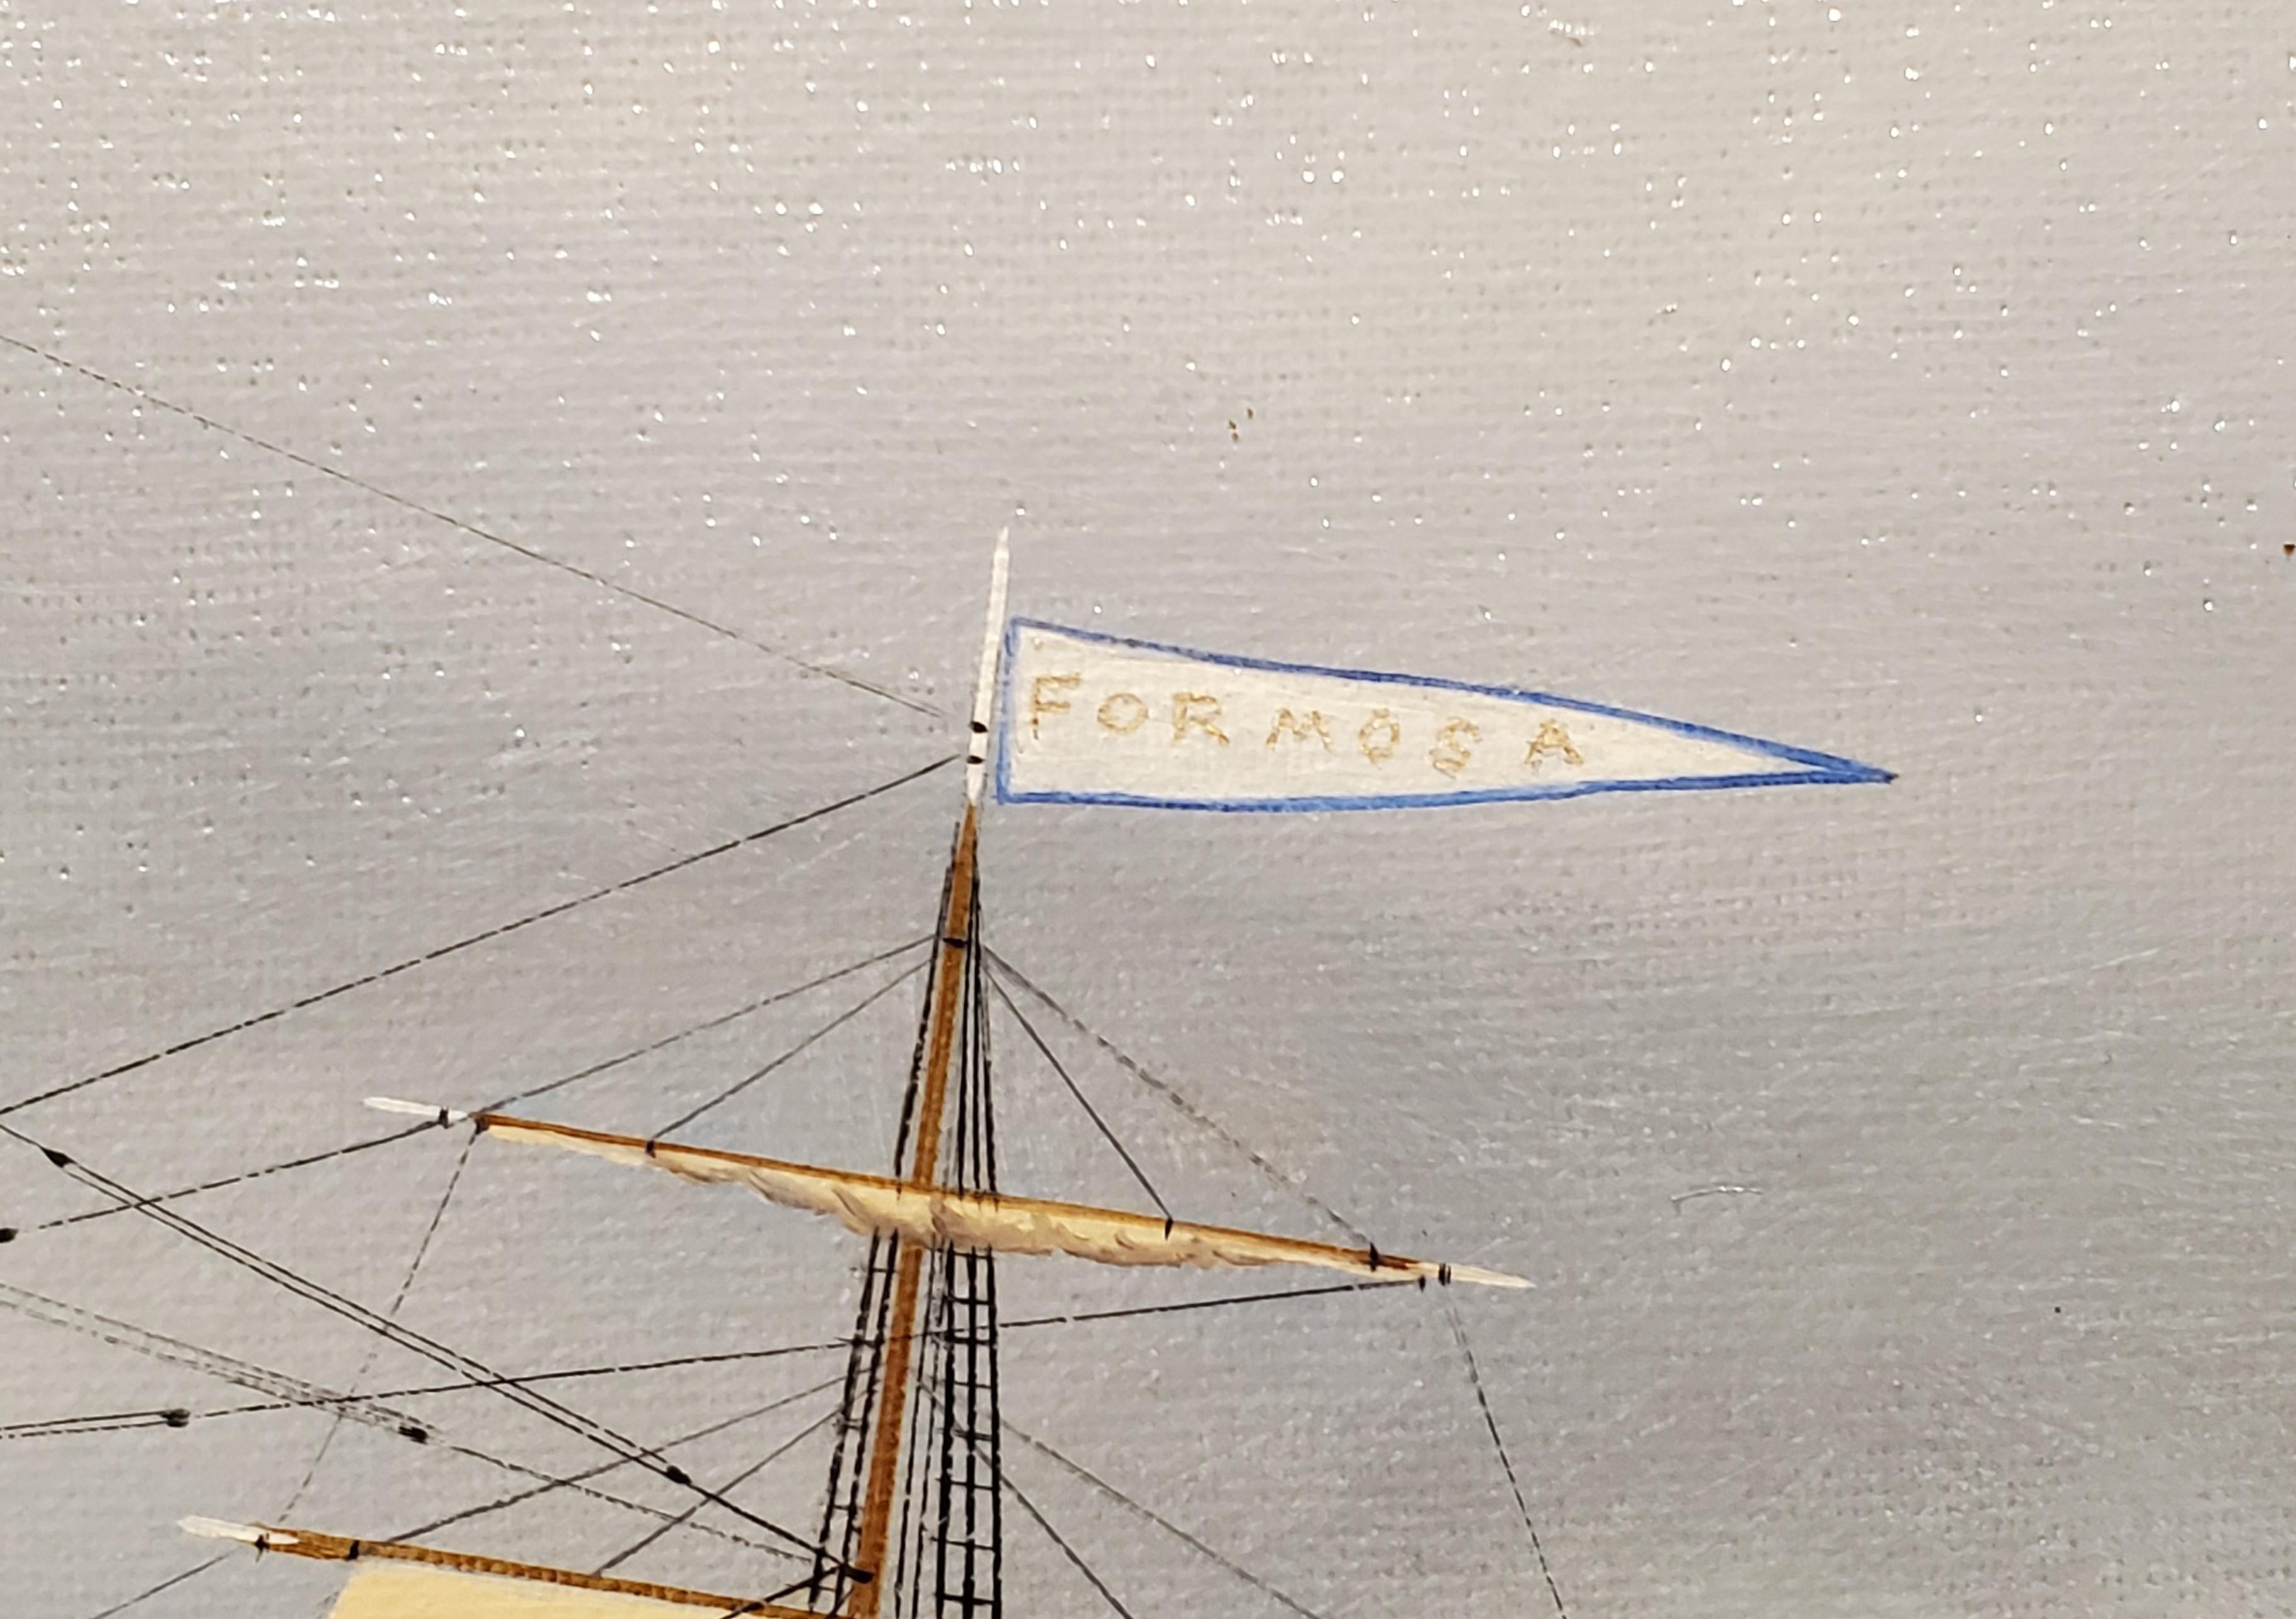 The Formosa A Ship At Sea signed by R. Jordan 3